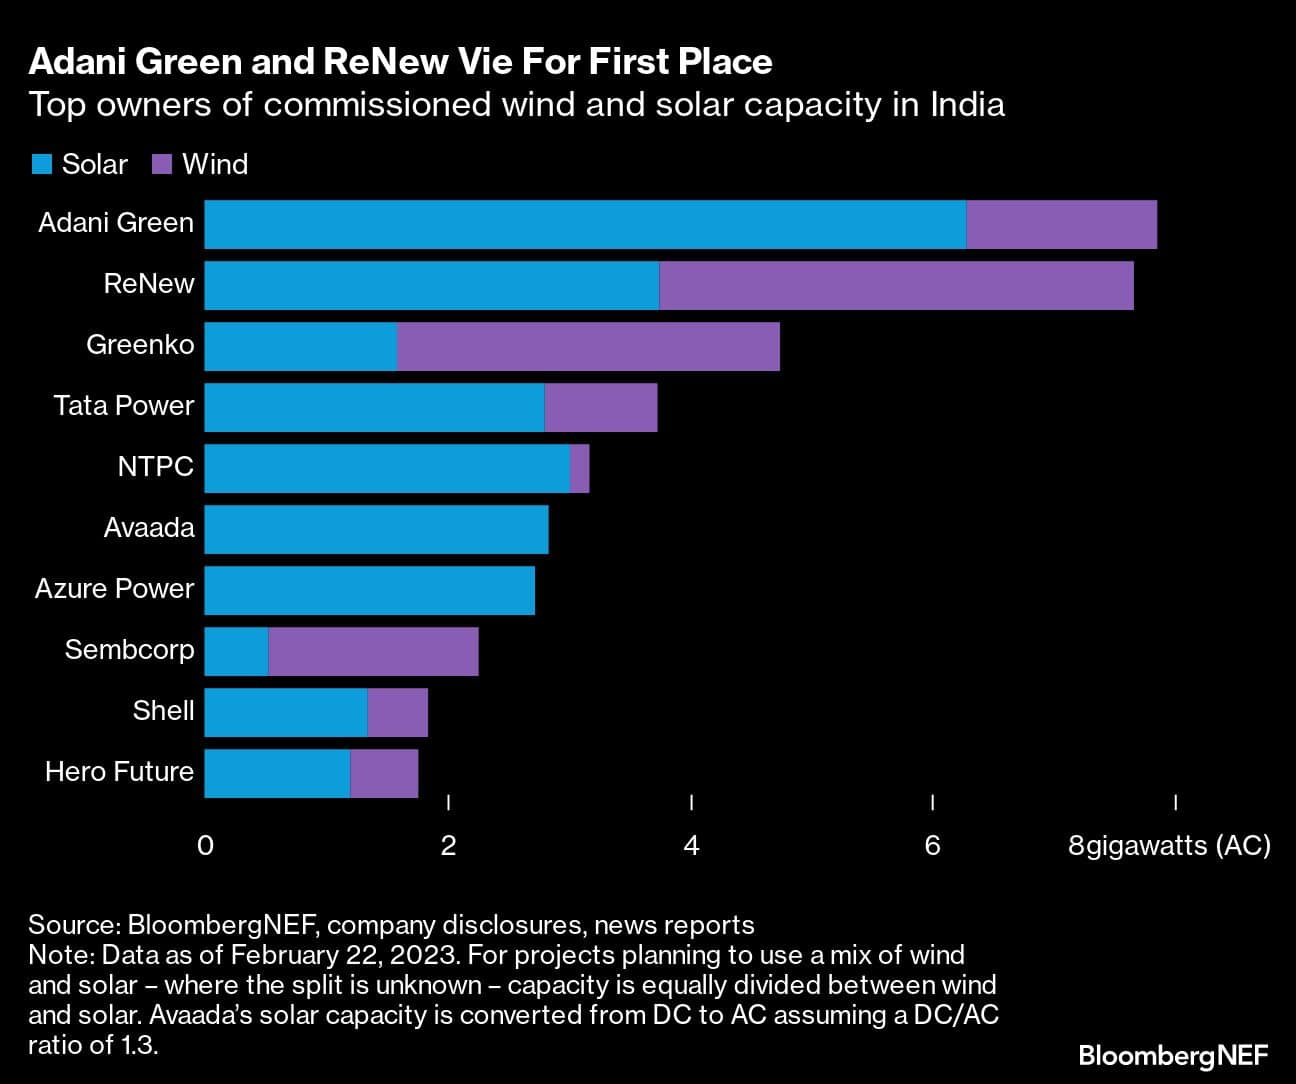 Adani Green and ReNew Vie For First Place | Top owners of commissioned wind and solar capacity in India